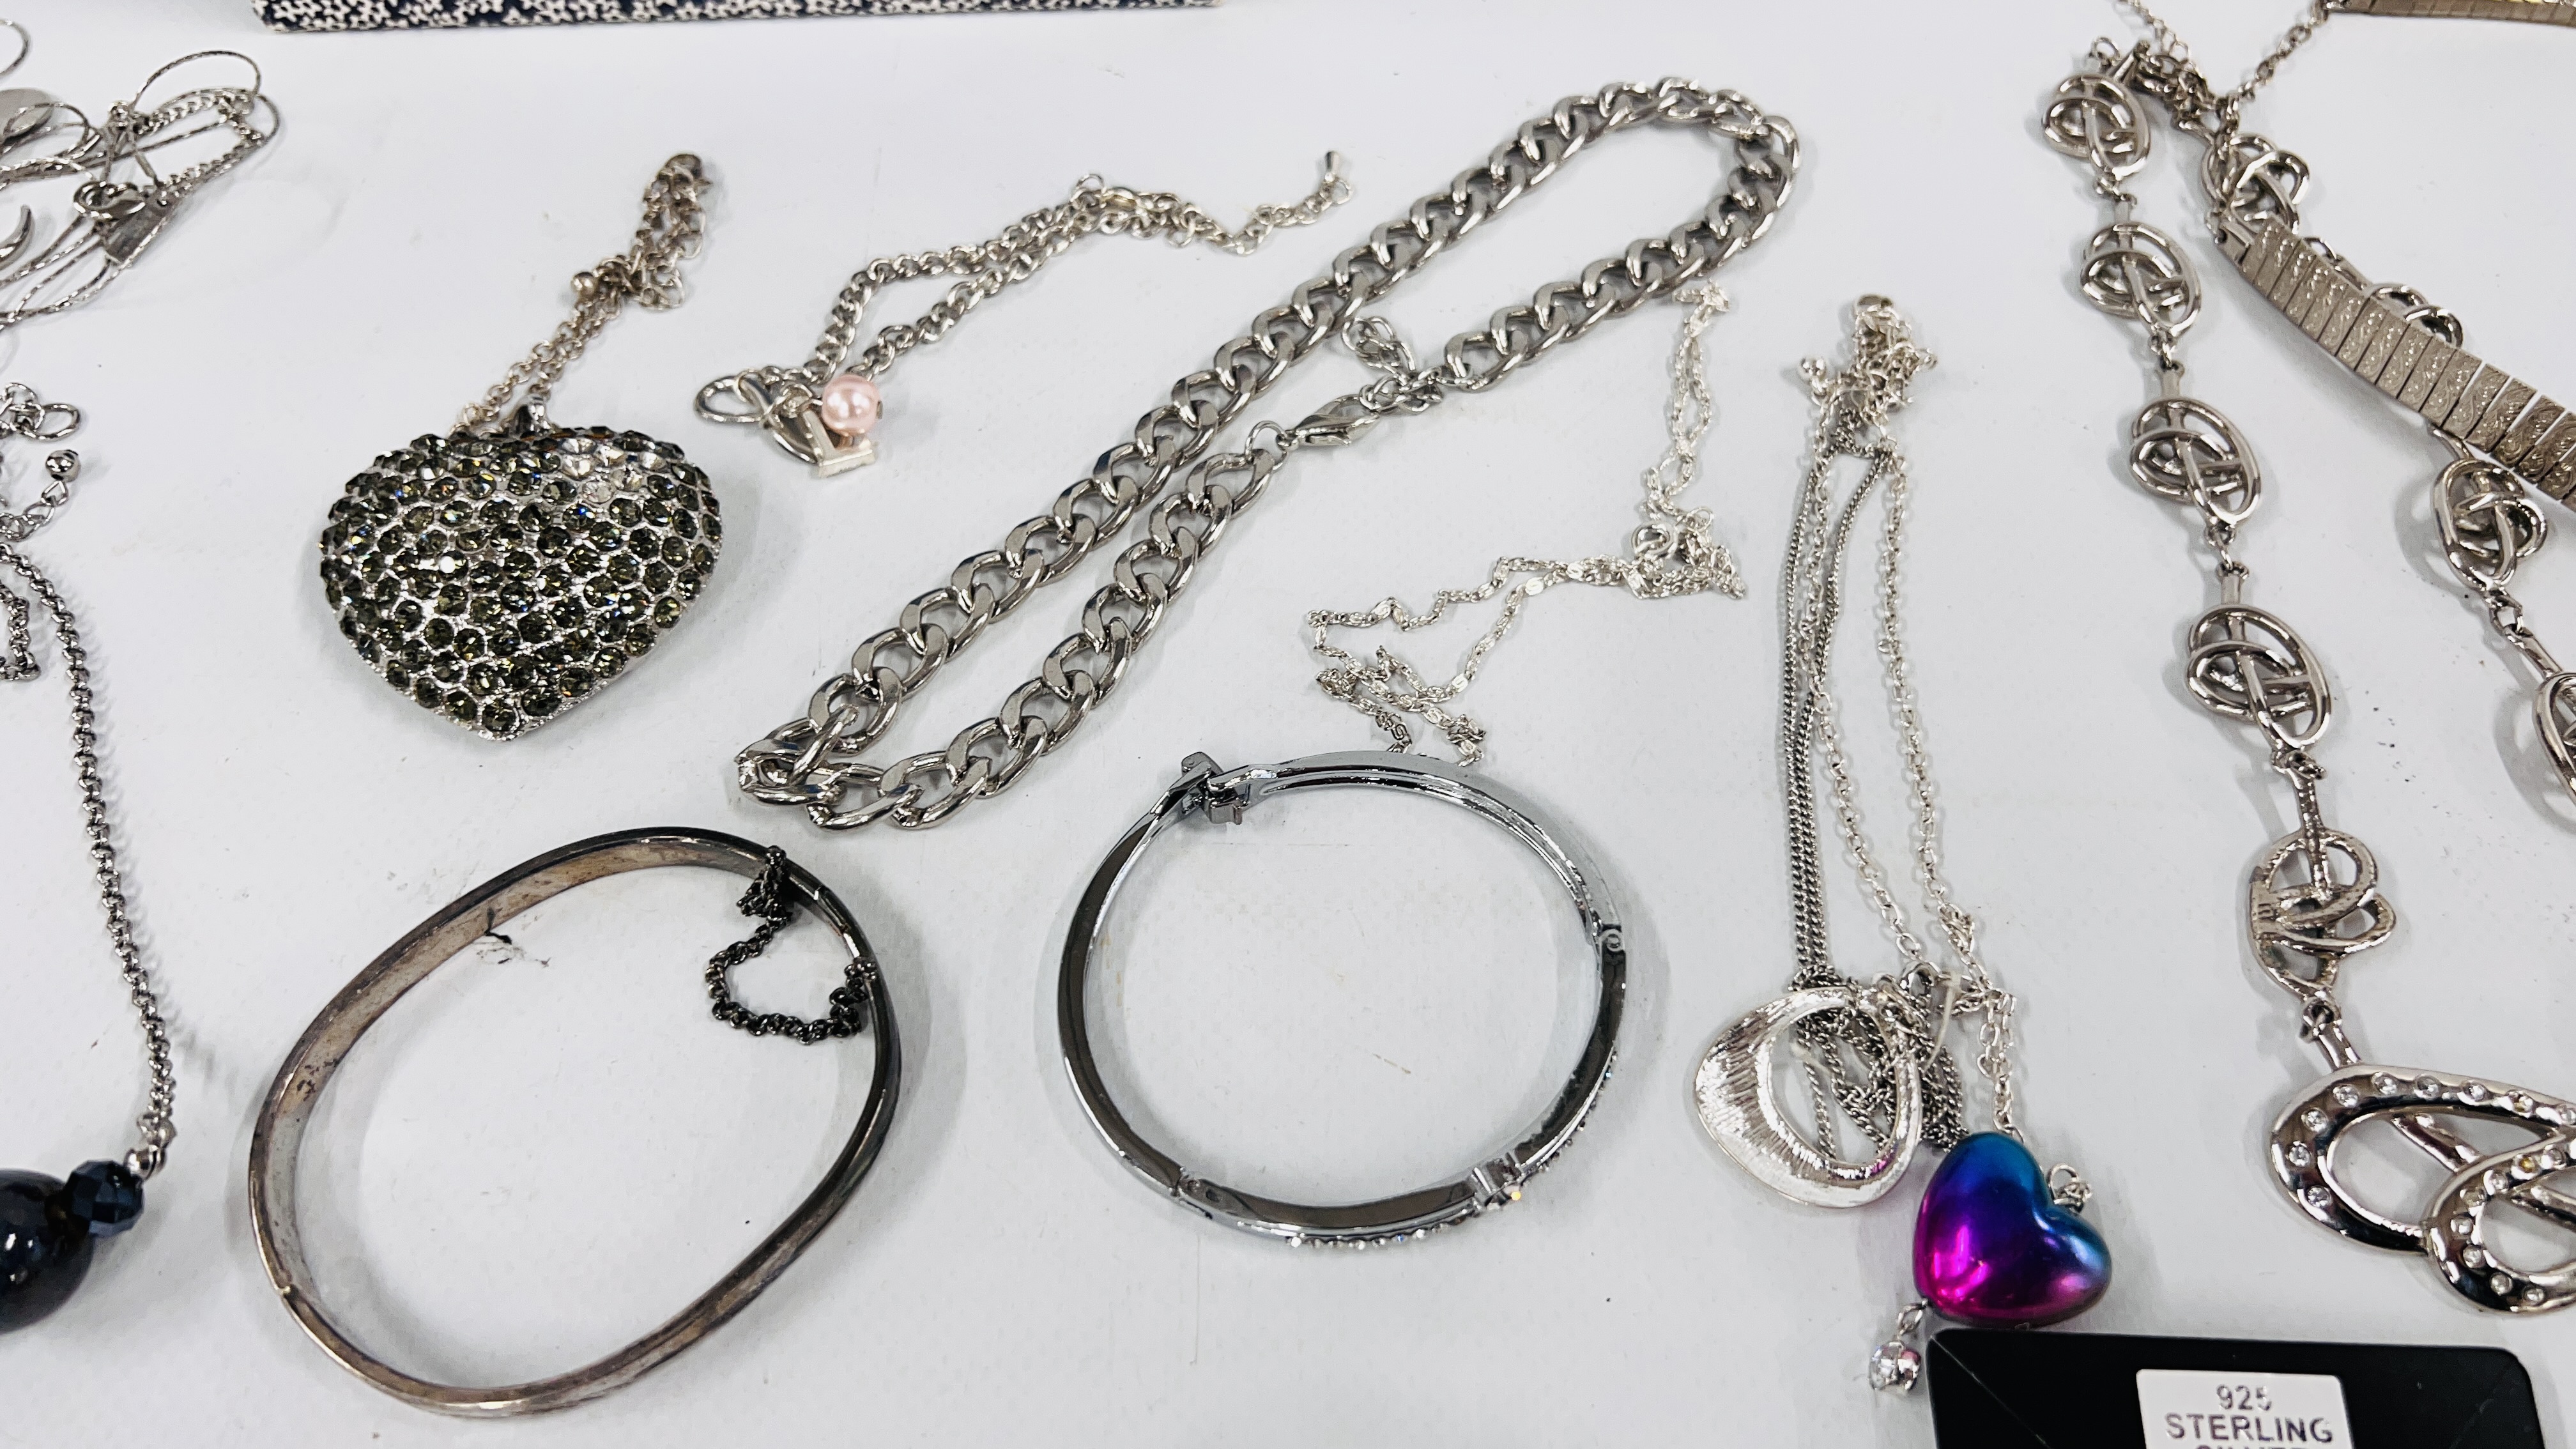 SELECTION OF SILVERTONE COSTUME JEWELLERY ALONG WITH A JEWELLERY BOX FULL OF BEADED NECKLACES. - Image 5 of 12